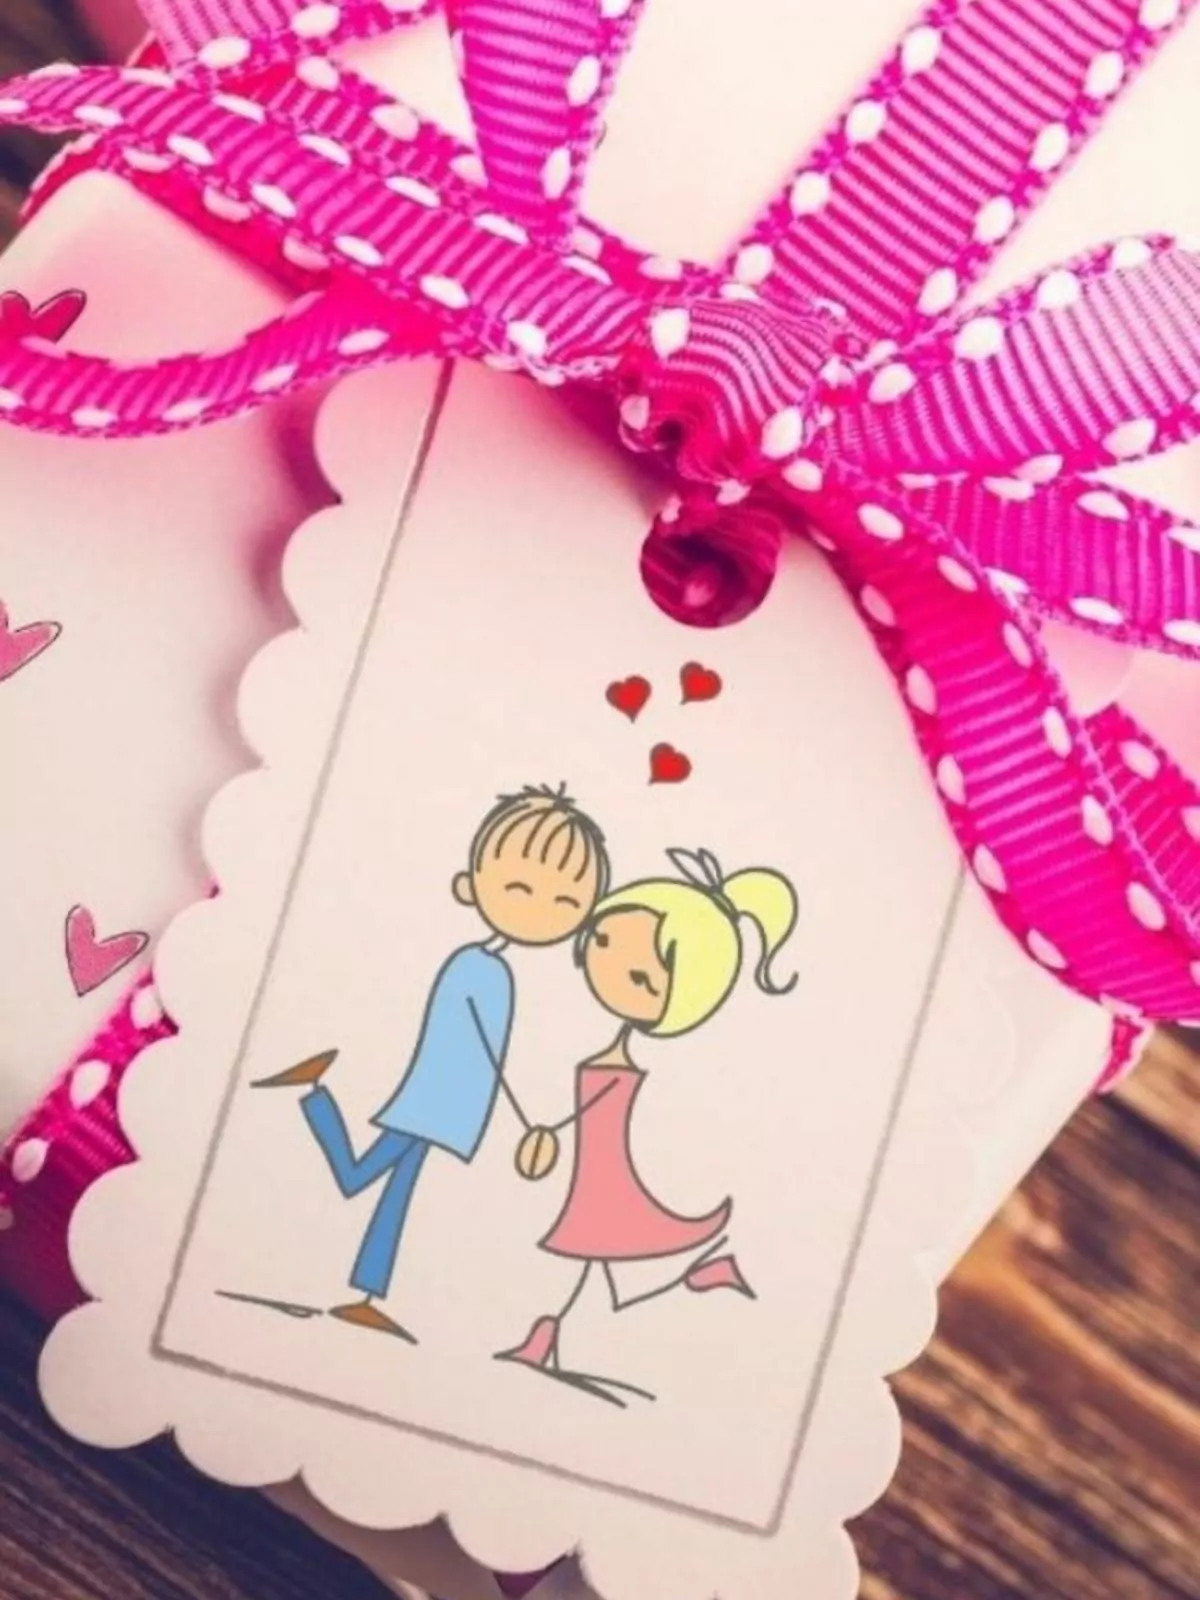 cute couple gift tag with pink polka dot bow.